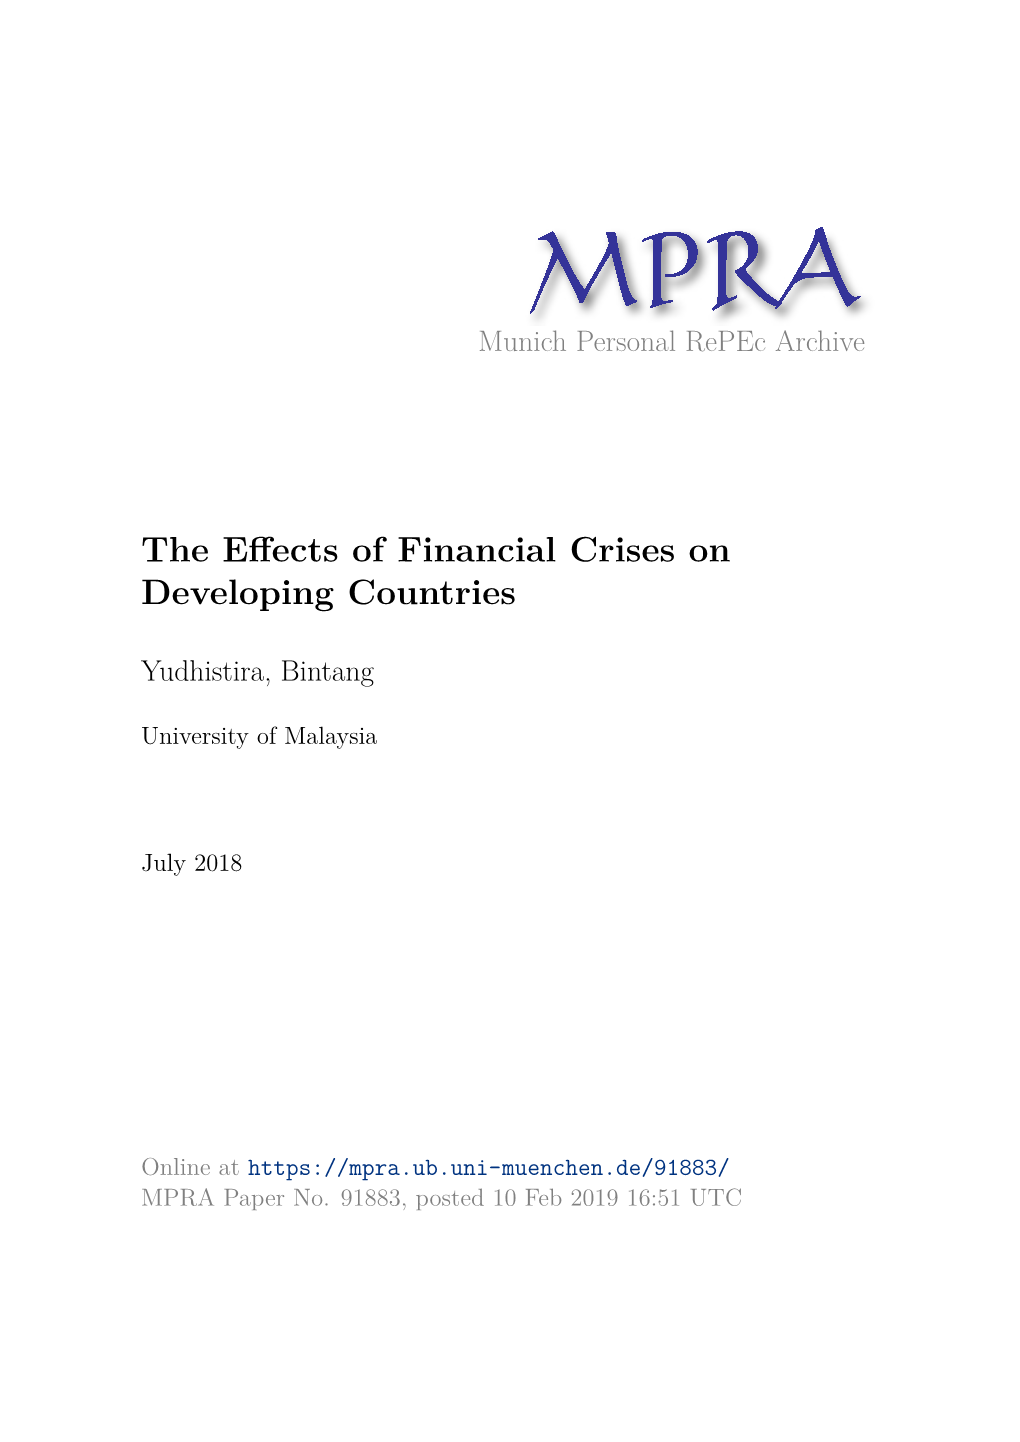 The Effects of Financial Crises on Developing Countries